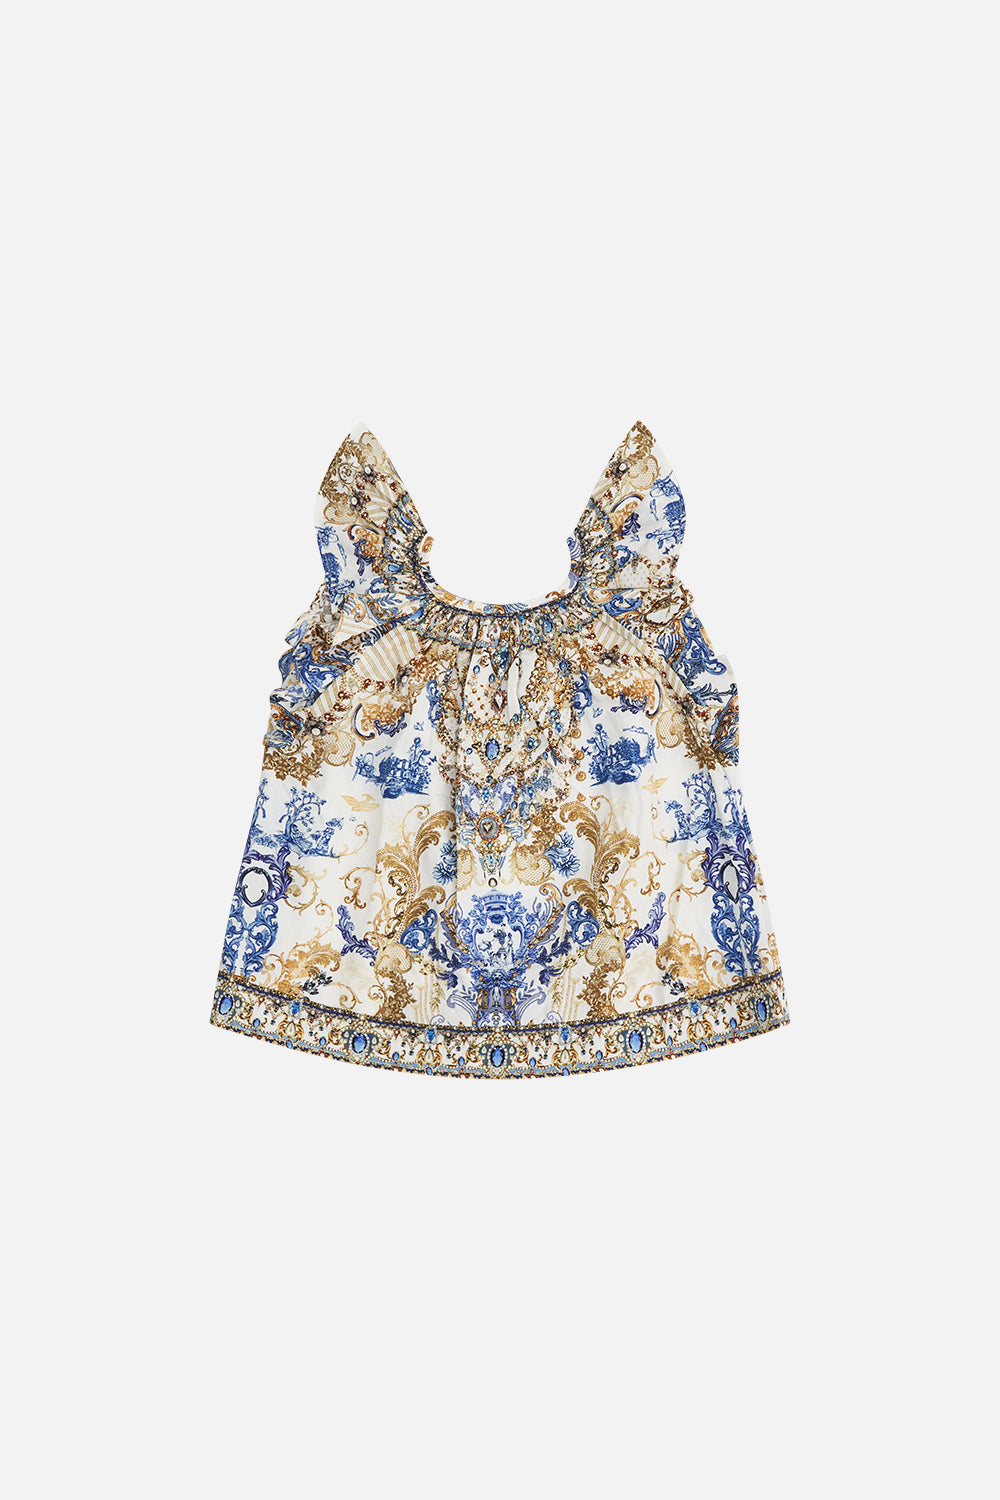 Product view of CAMILLA cotton frill sleeve top in Soul Searching print